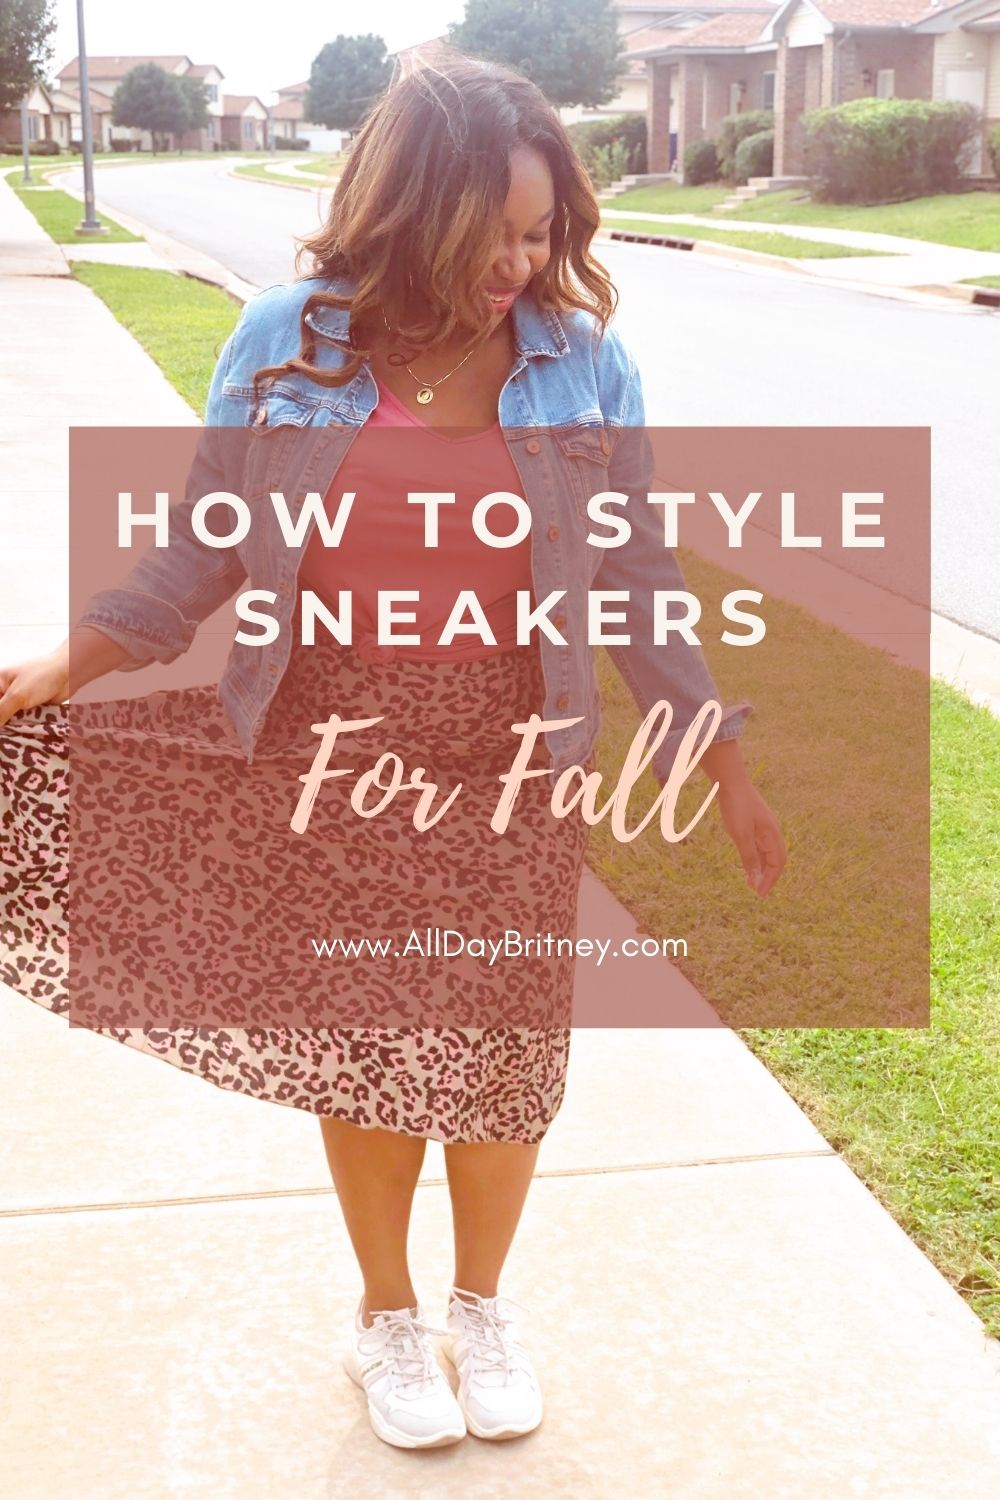 4 Quick, Cute Sneaker Outfits For Fall - All Day Britney